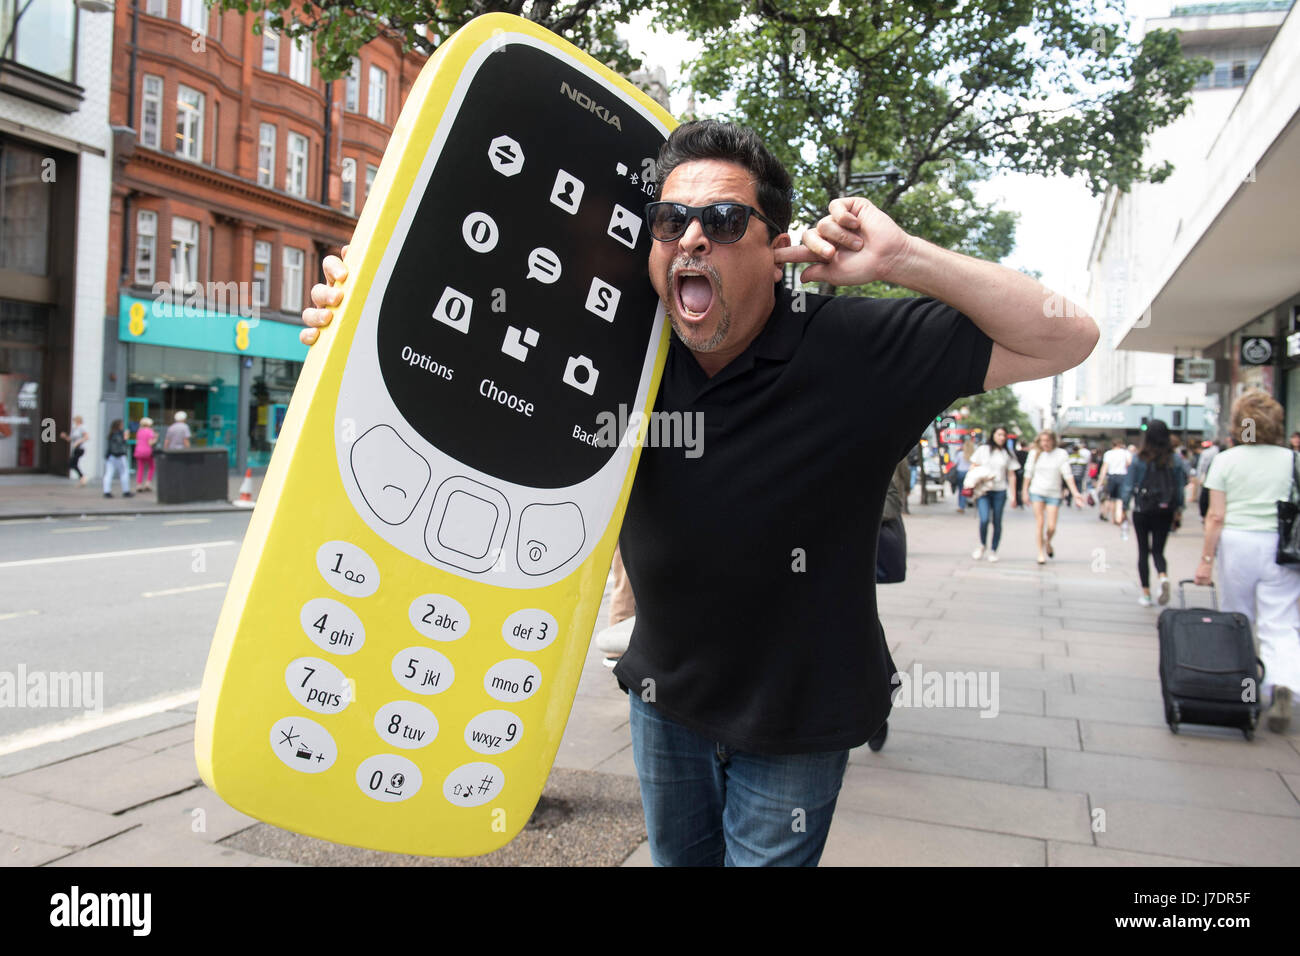 comedian-dom-joly-recreates-a-trigger-happy-tv-moment-to-launch-the-J7DR5F.jpg